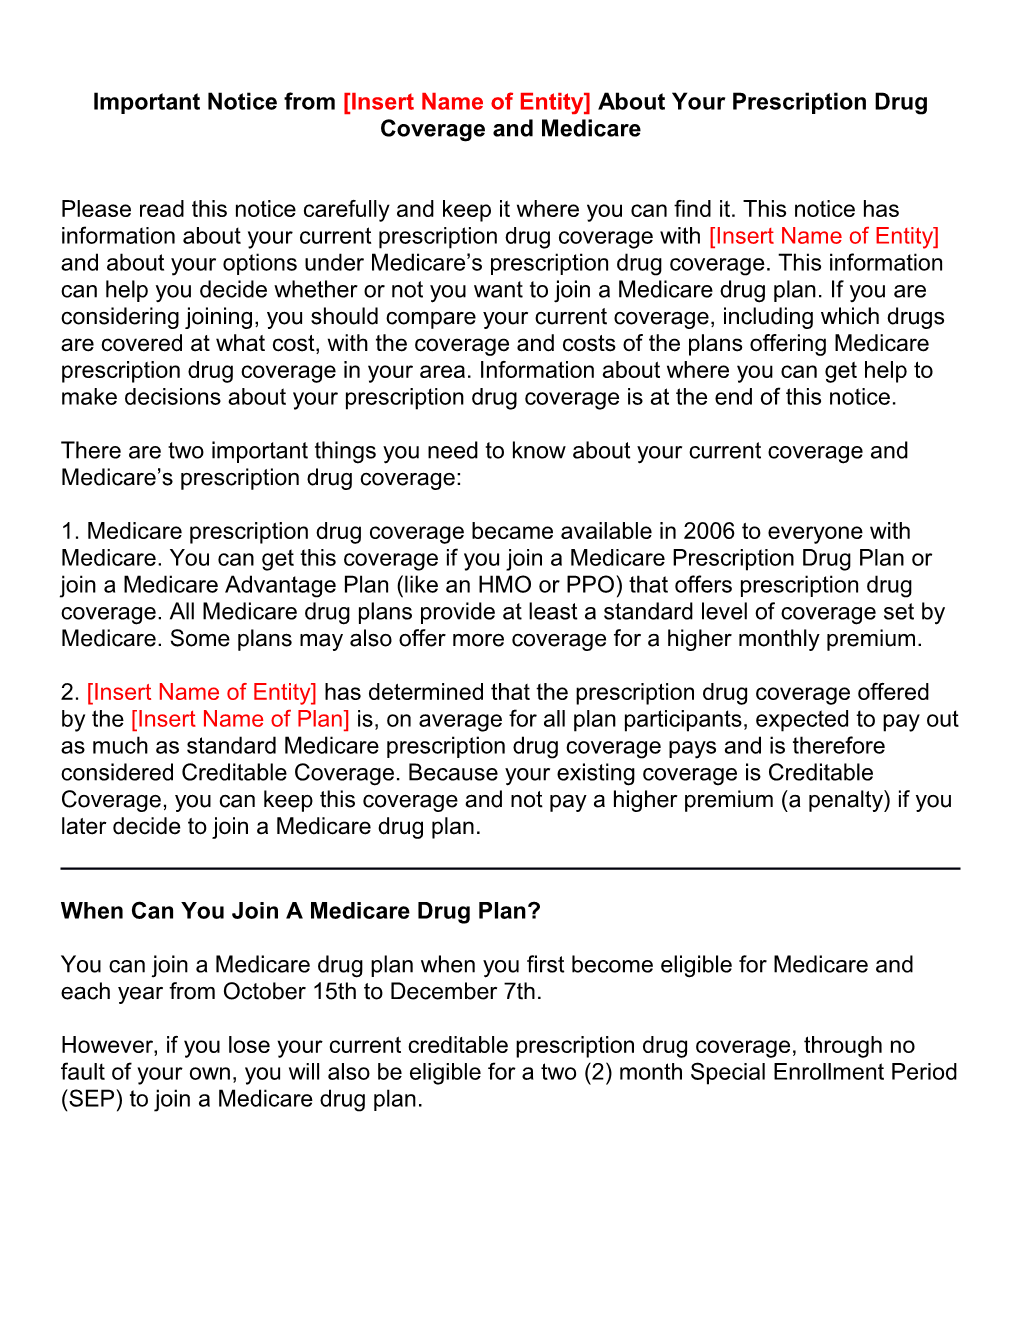 Important Notice from Insert Name of Entity About Your Prescription Drug Coverage and Medicare